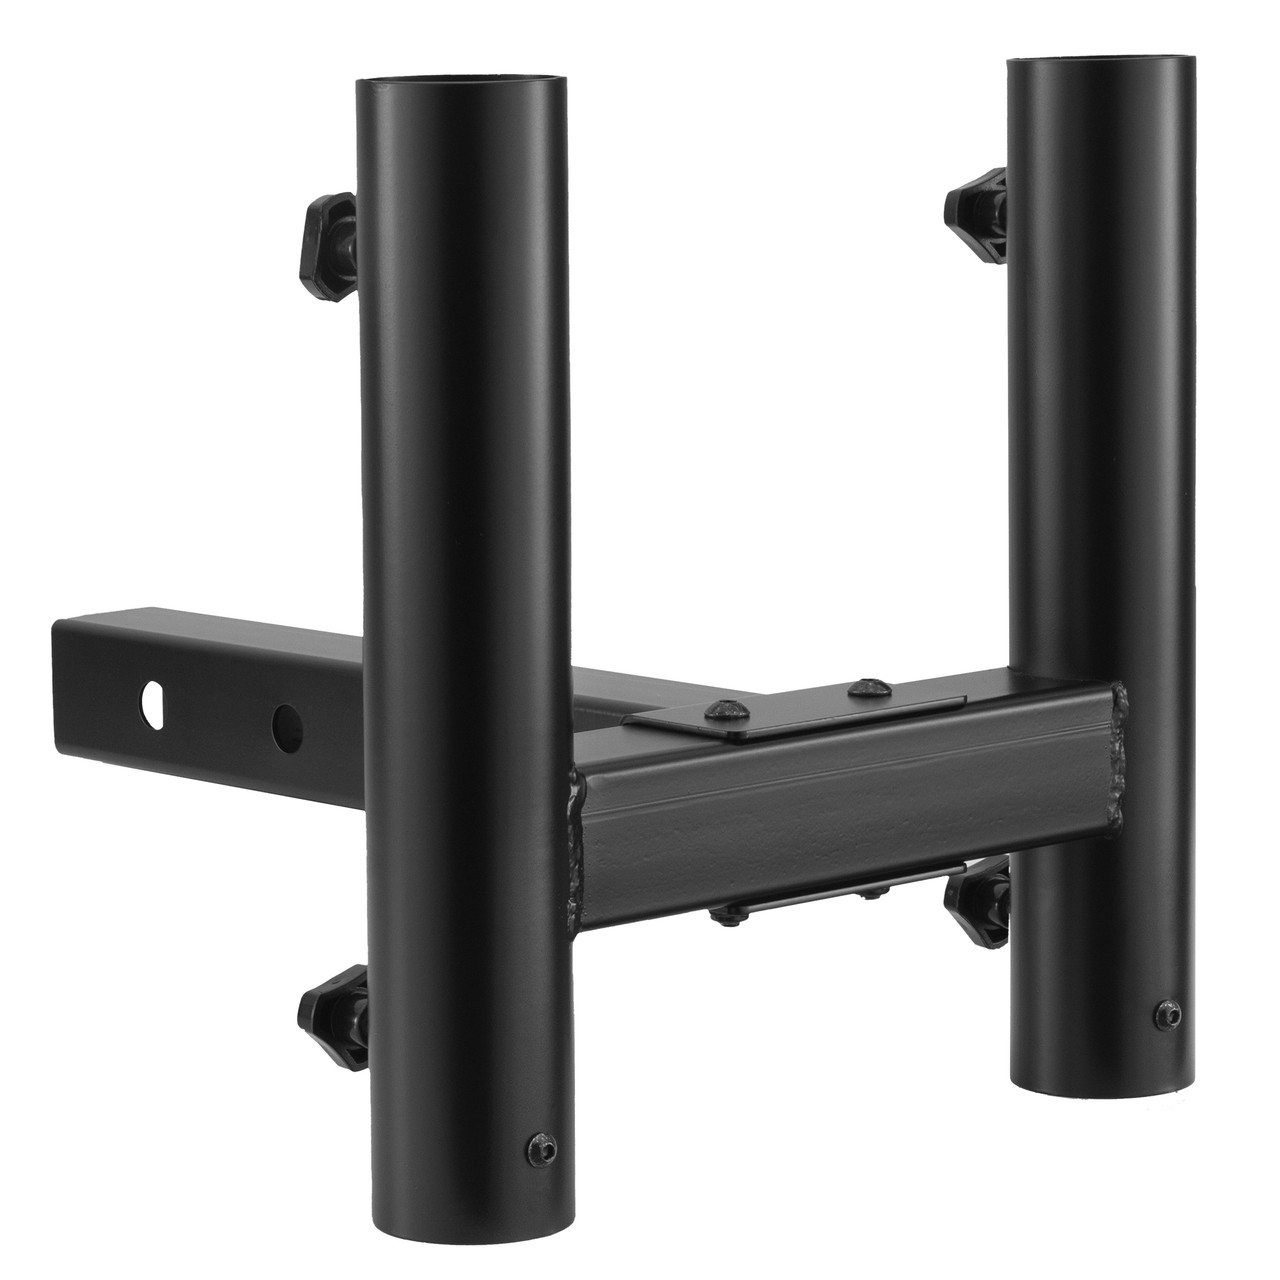 Trailer Hitch Dual Flag Pole Mount for 2 Receiver